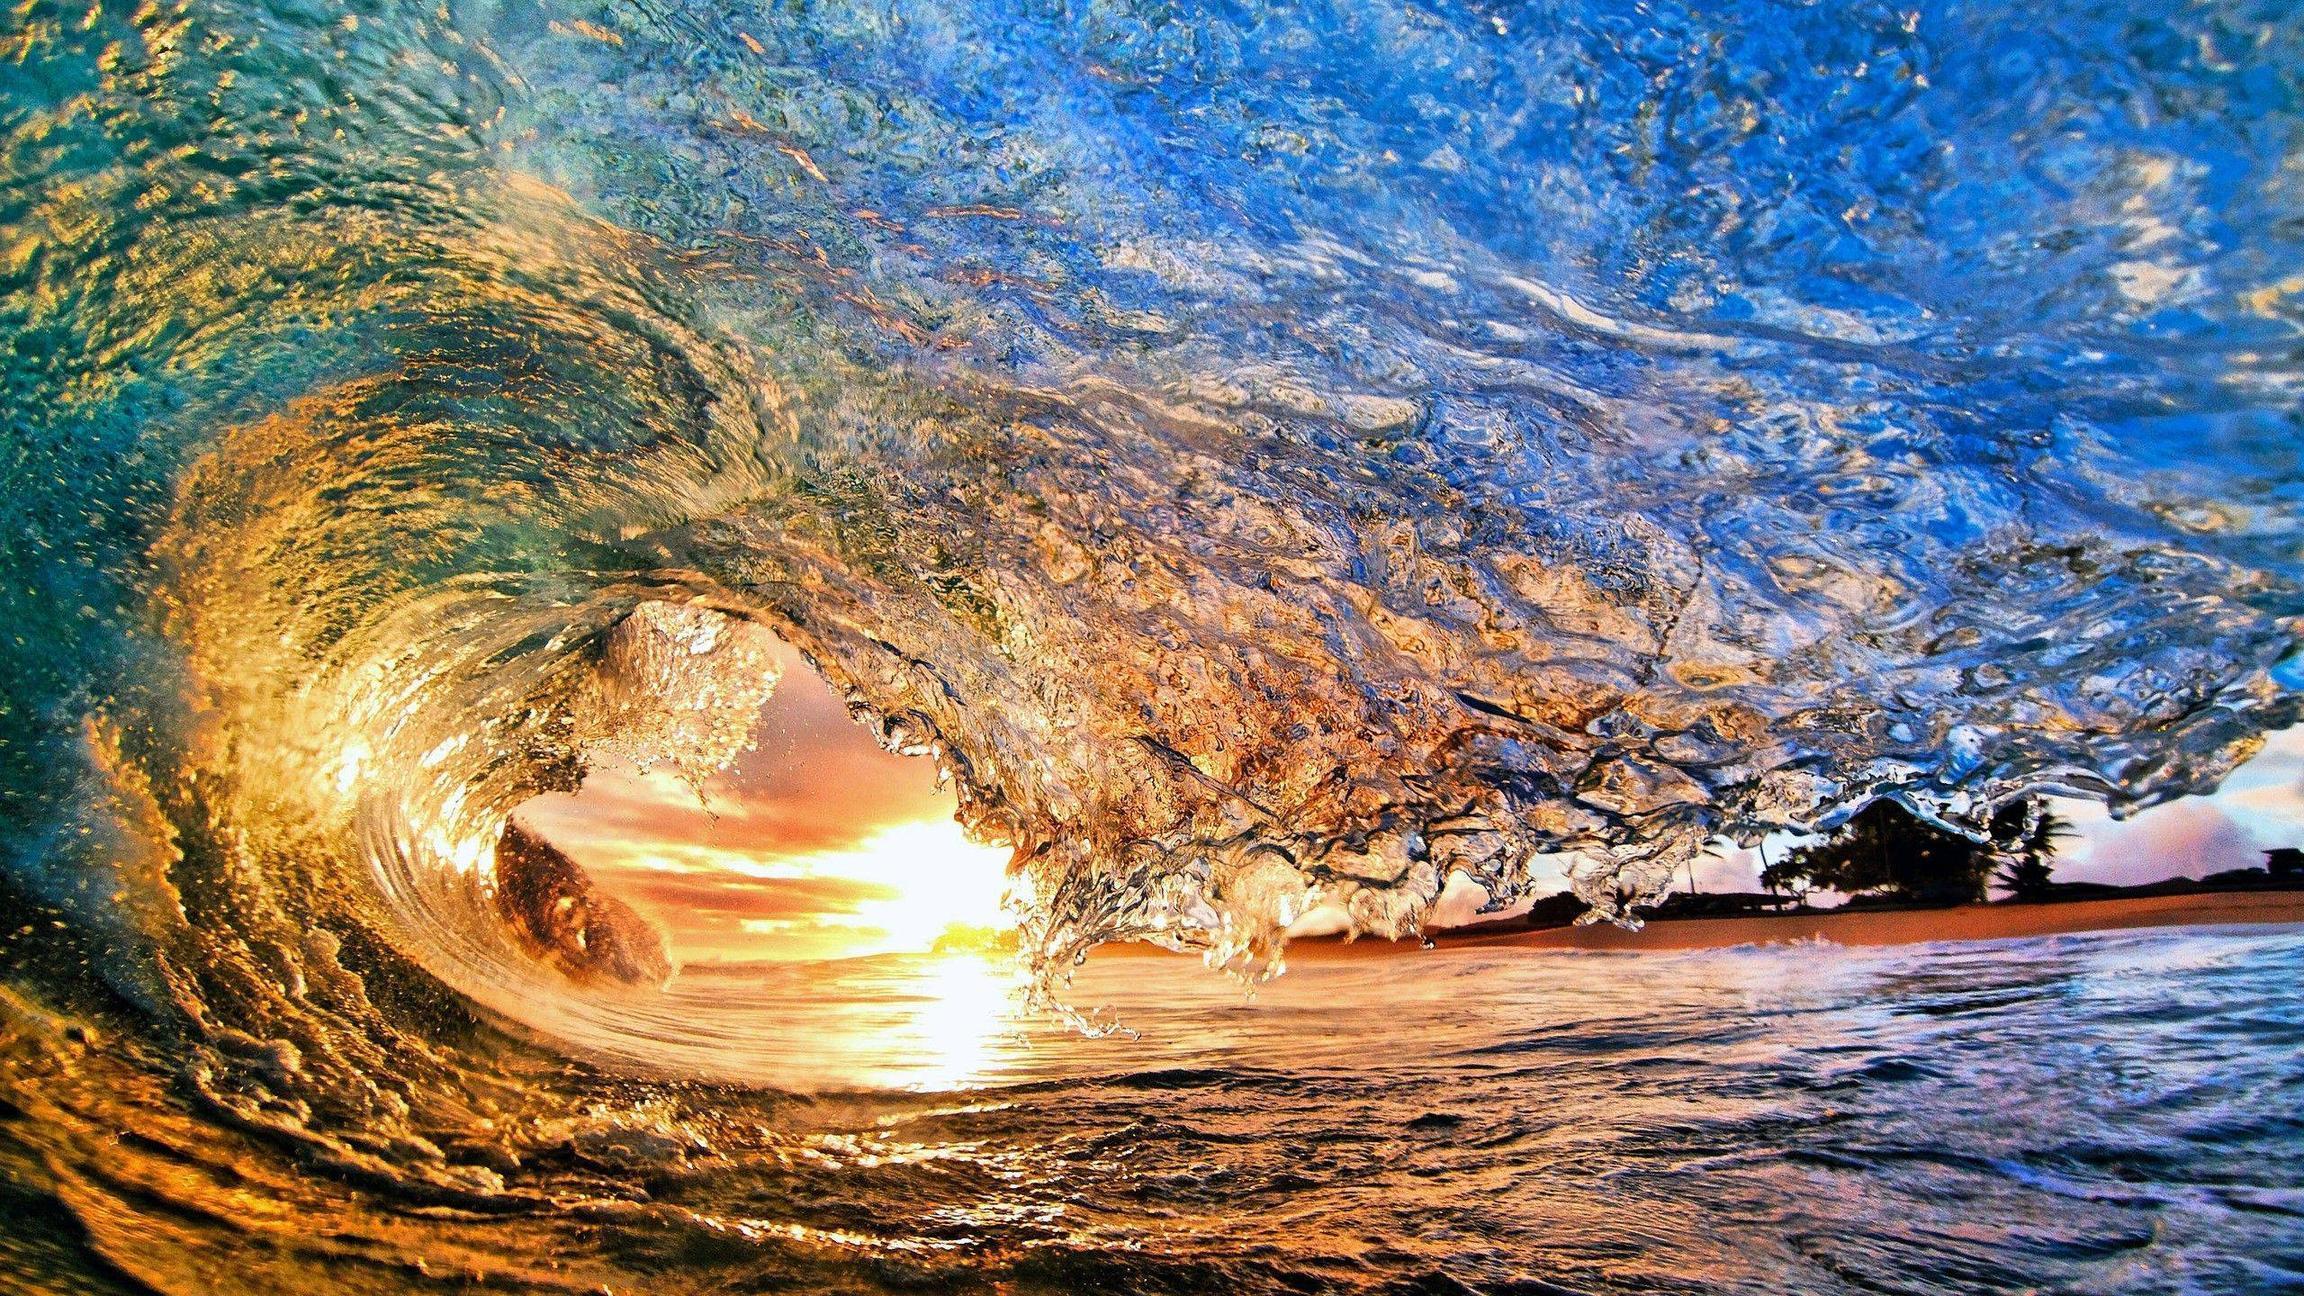 Under the wave wallpaper